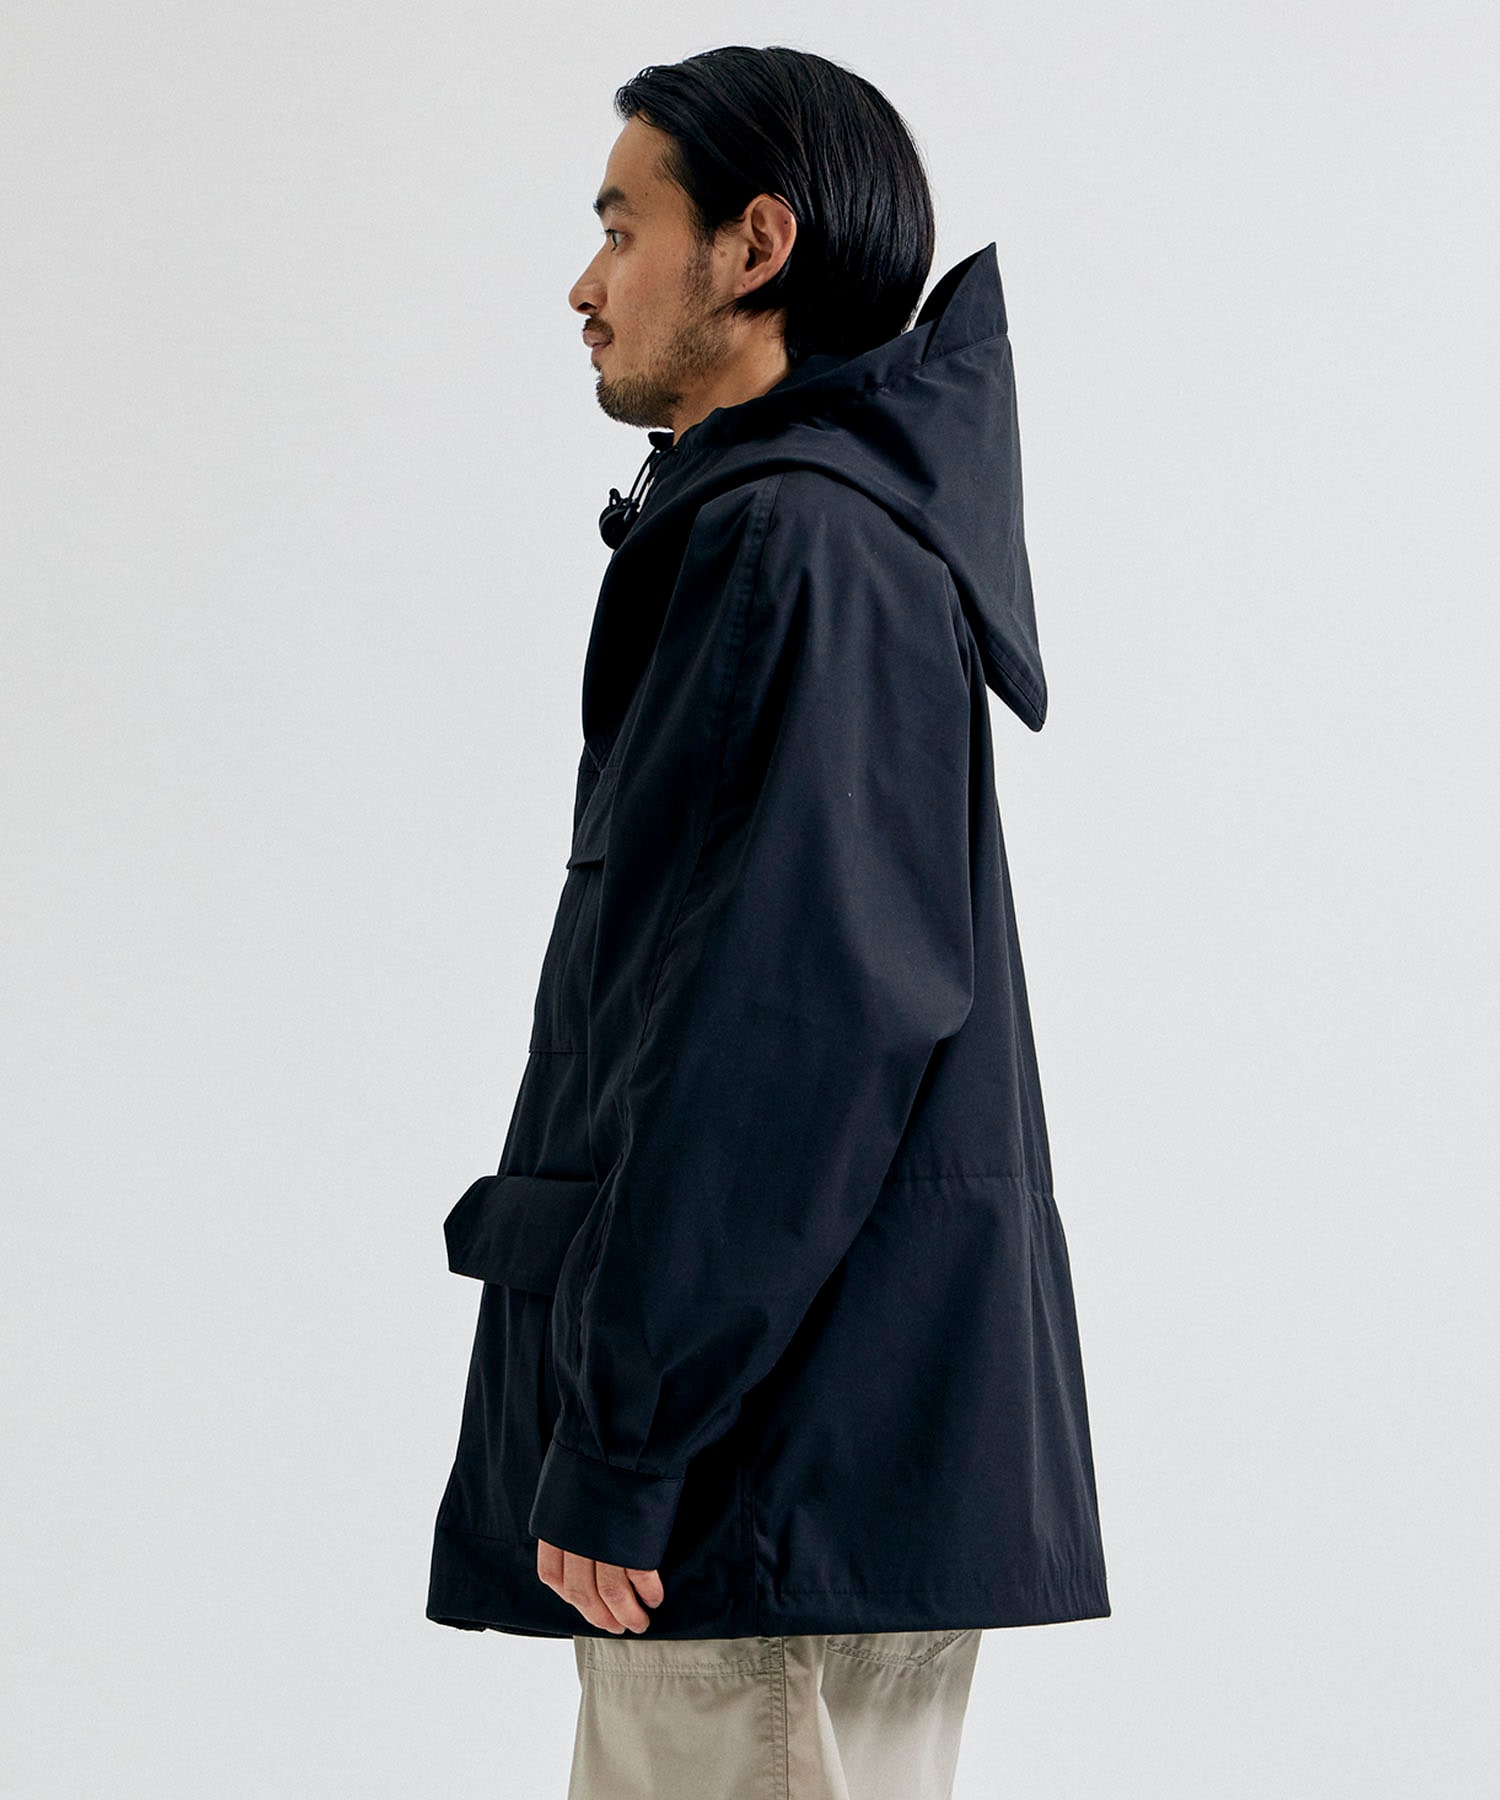 65/35 Mountain Parka | THE NORTH FACE PURPLE LABEL